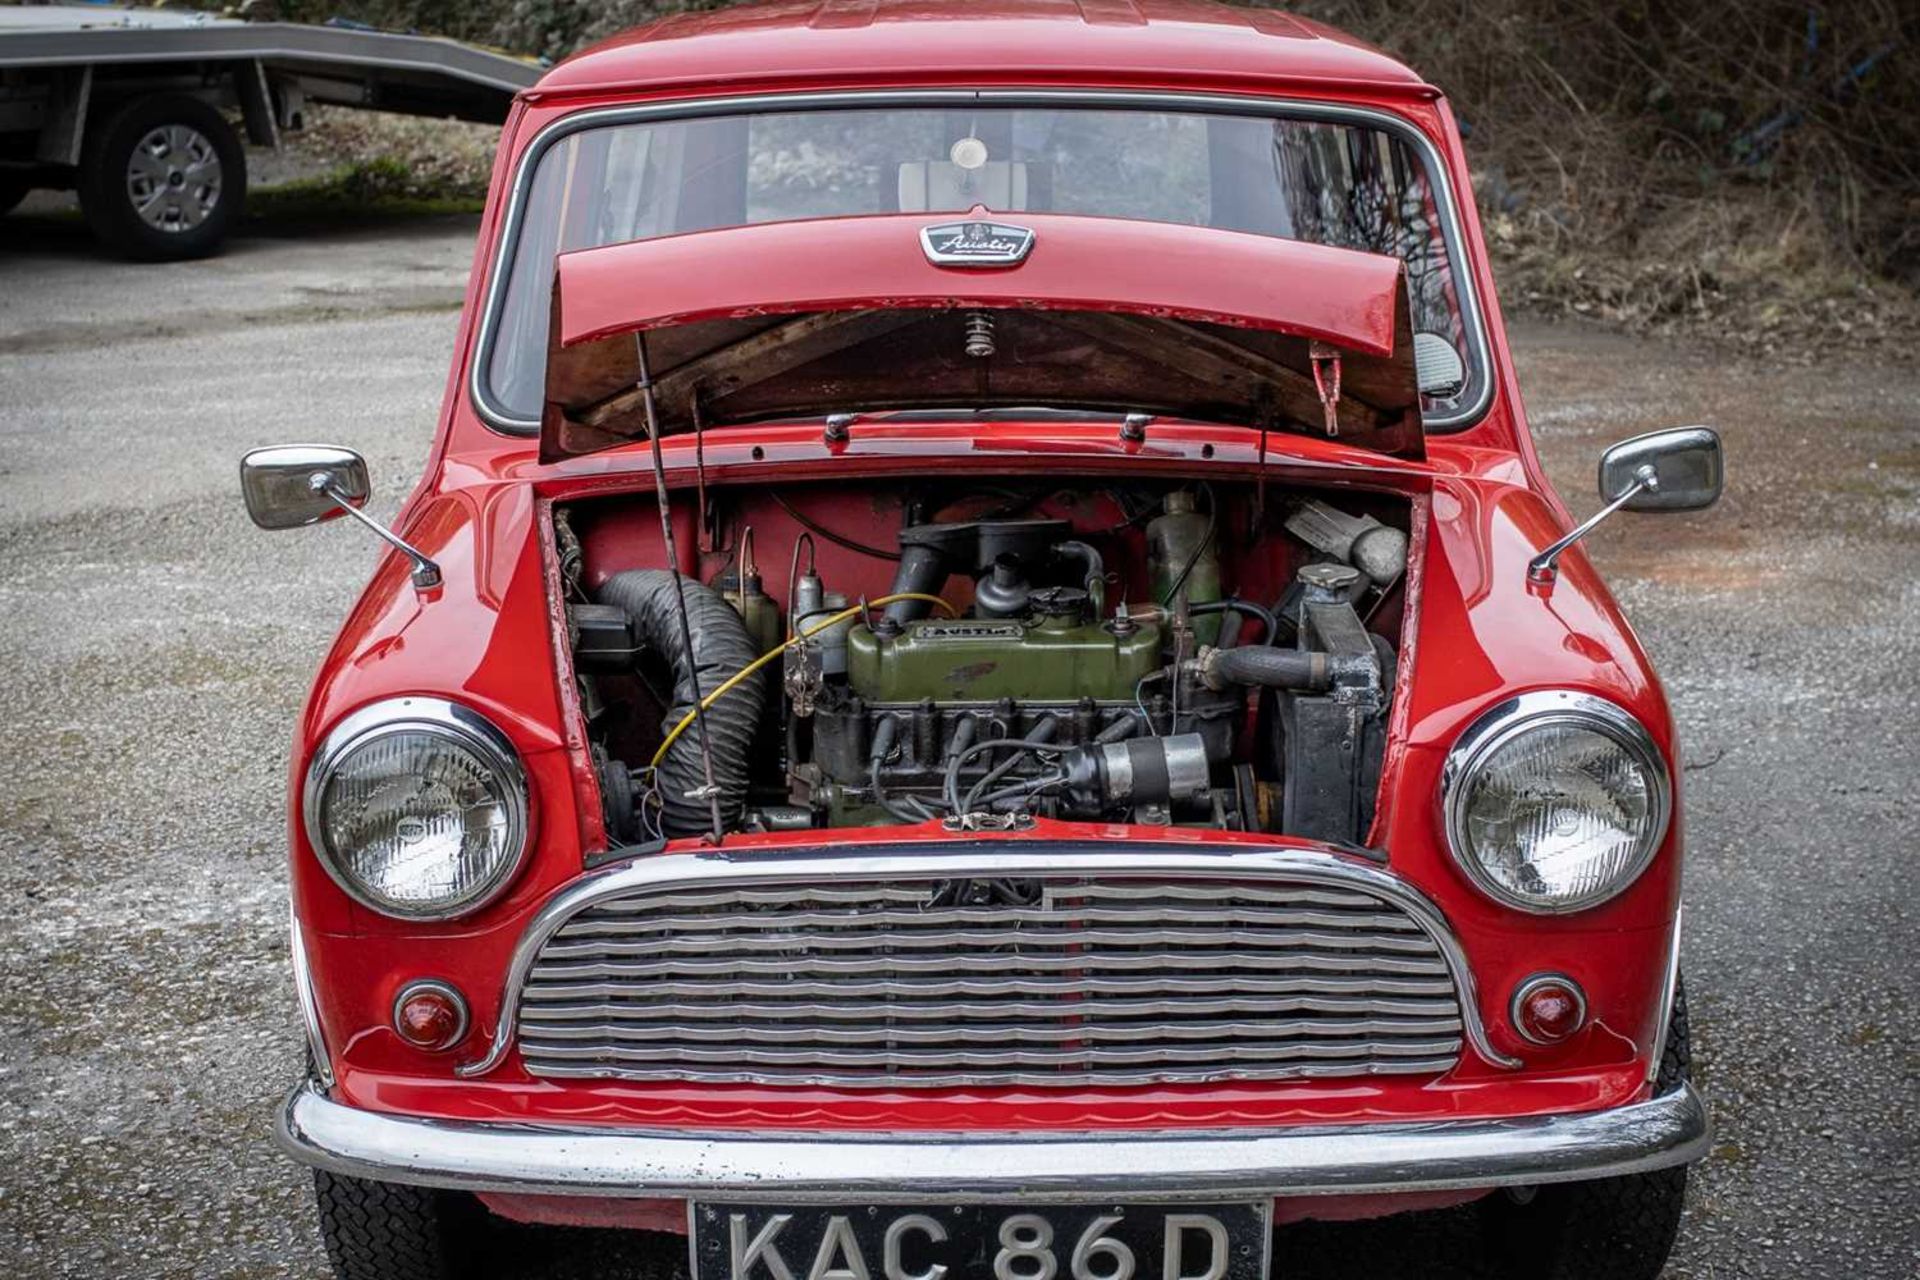 1966 Austin Mini Countryman Part of museum display in the Isle of Man for five years - Image 50 of 68